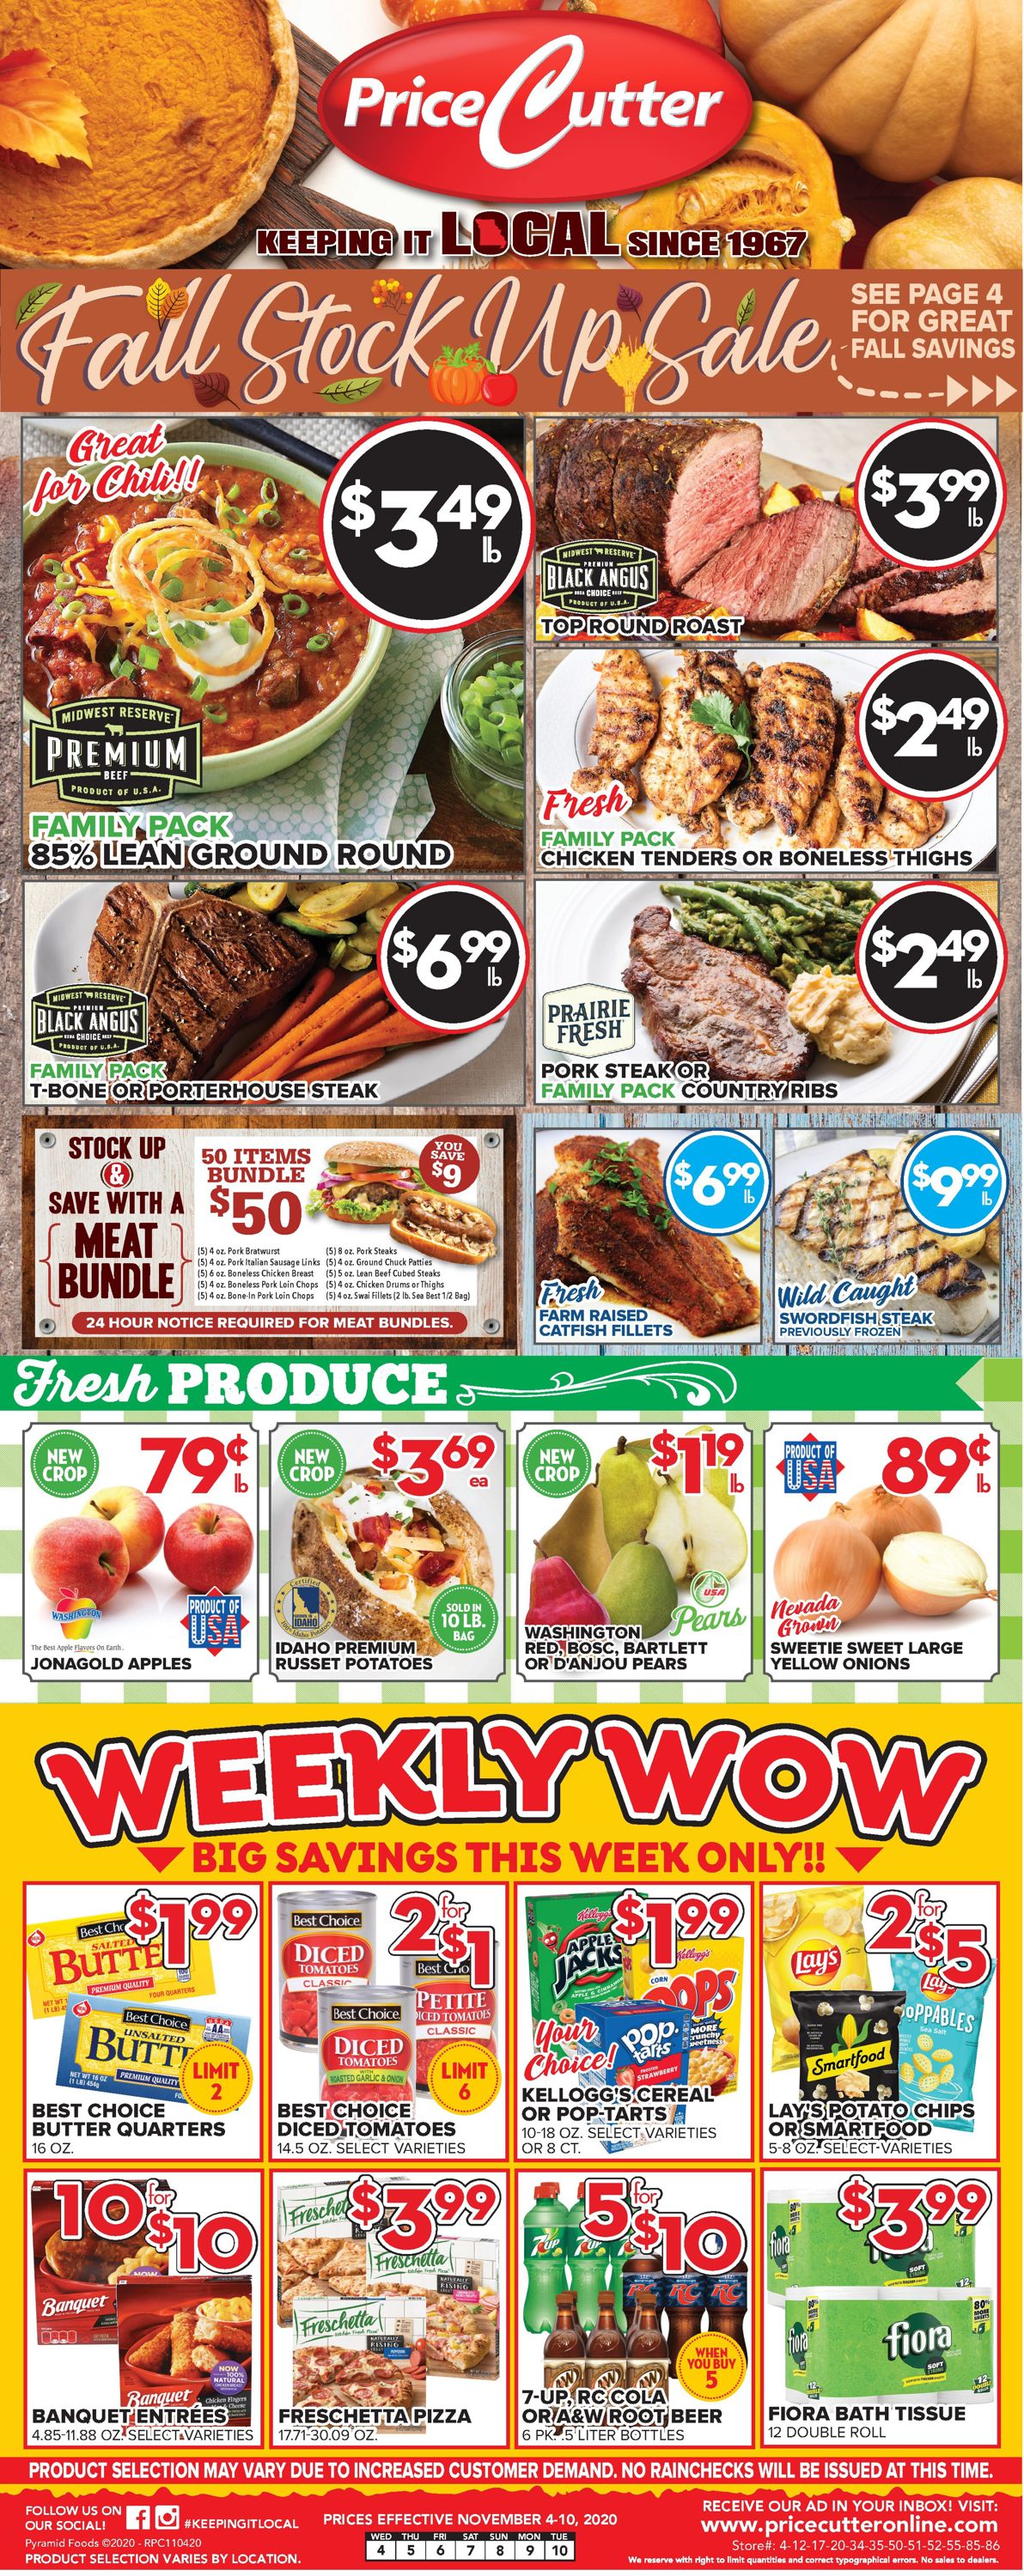 Price Cutter Weekly Ad Circular - valid 11/04-11/10/2020